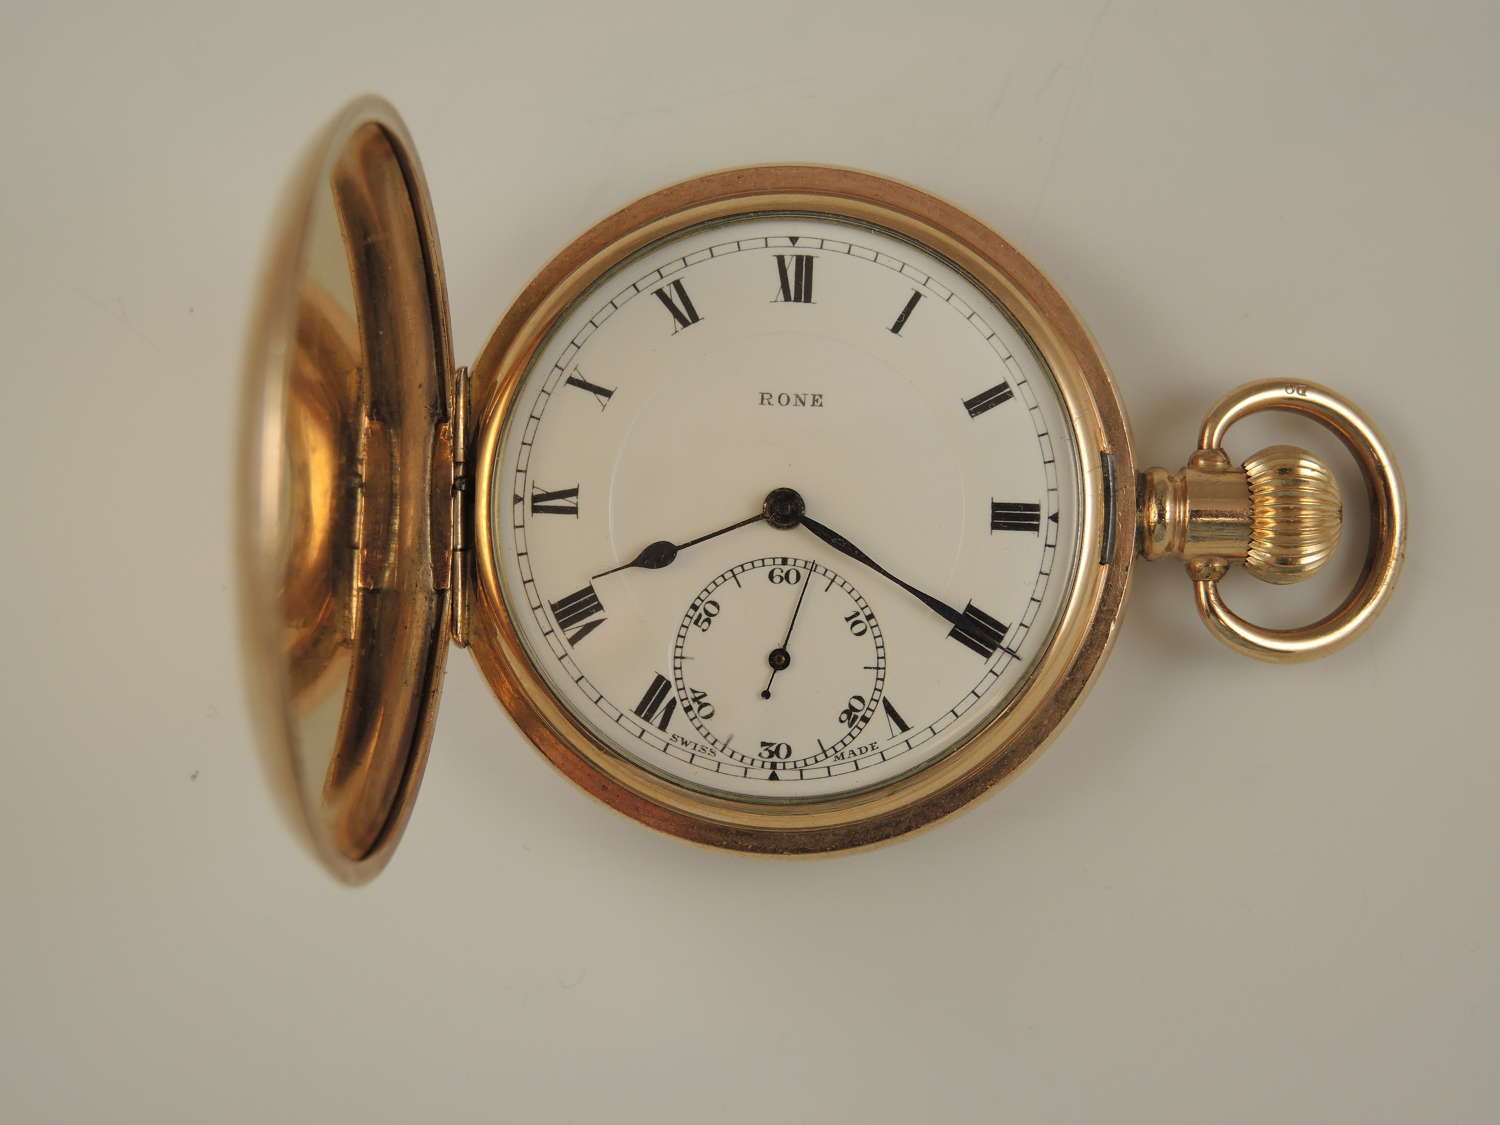 Vintage gold plated full hunter pocket watch by Rone c1910